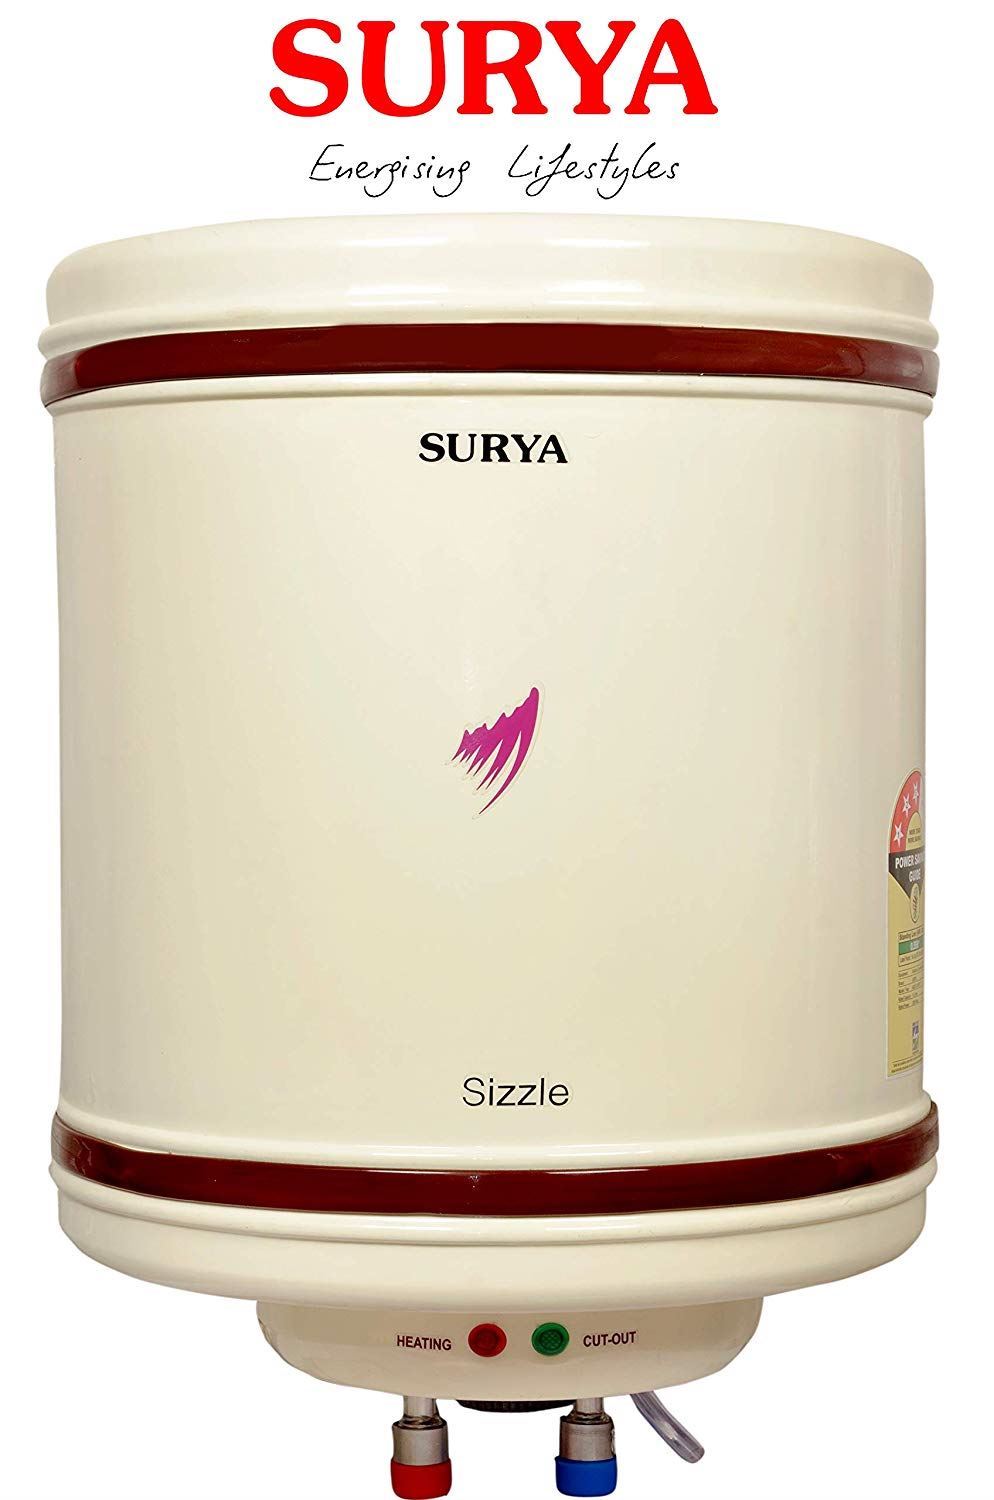 Surya Sizzle Water Heater 15 Ltr